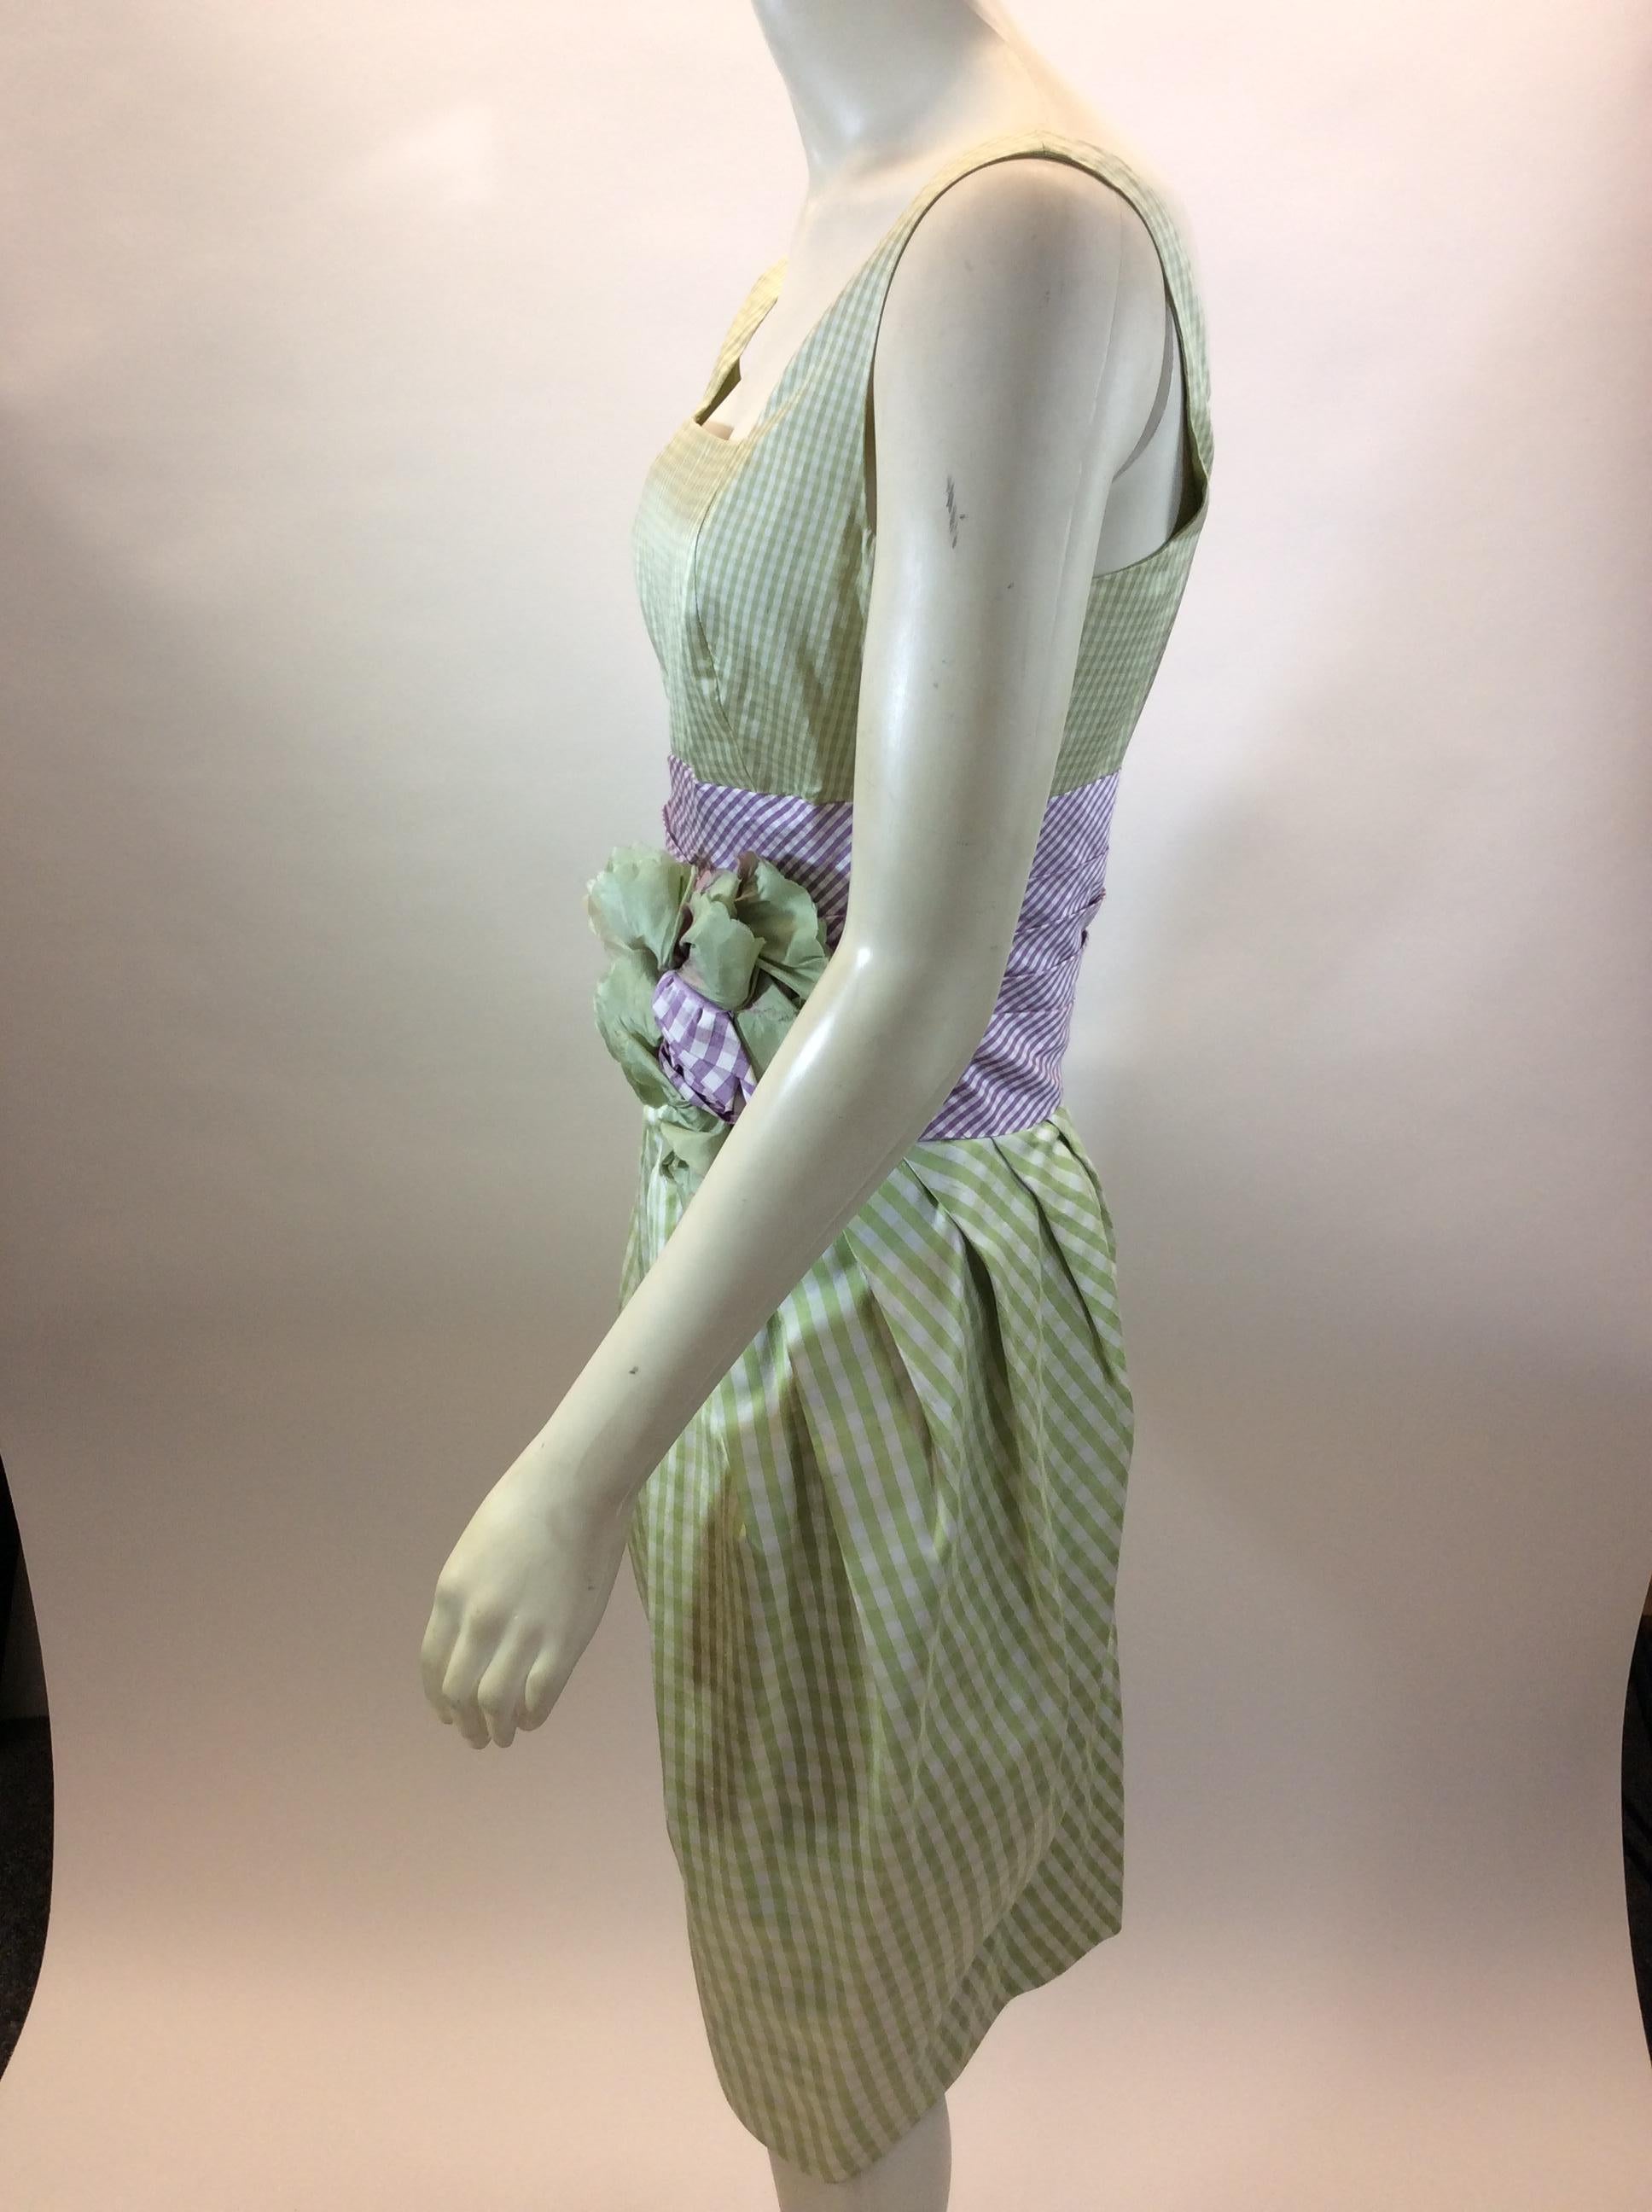 Bill Blass Green and Purple Plaid Dress
$499
Made in the US
Size 8
Length 40